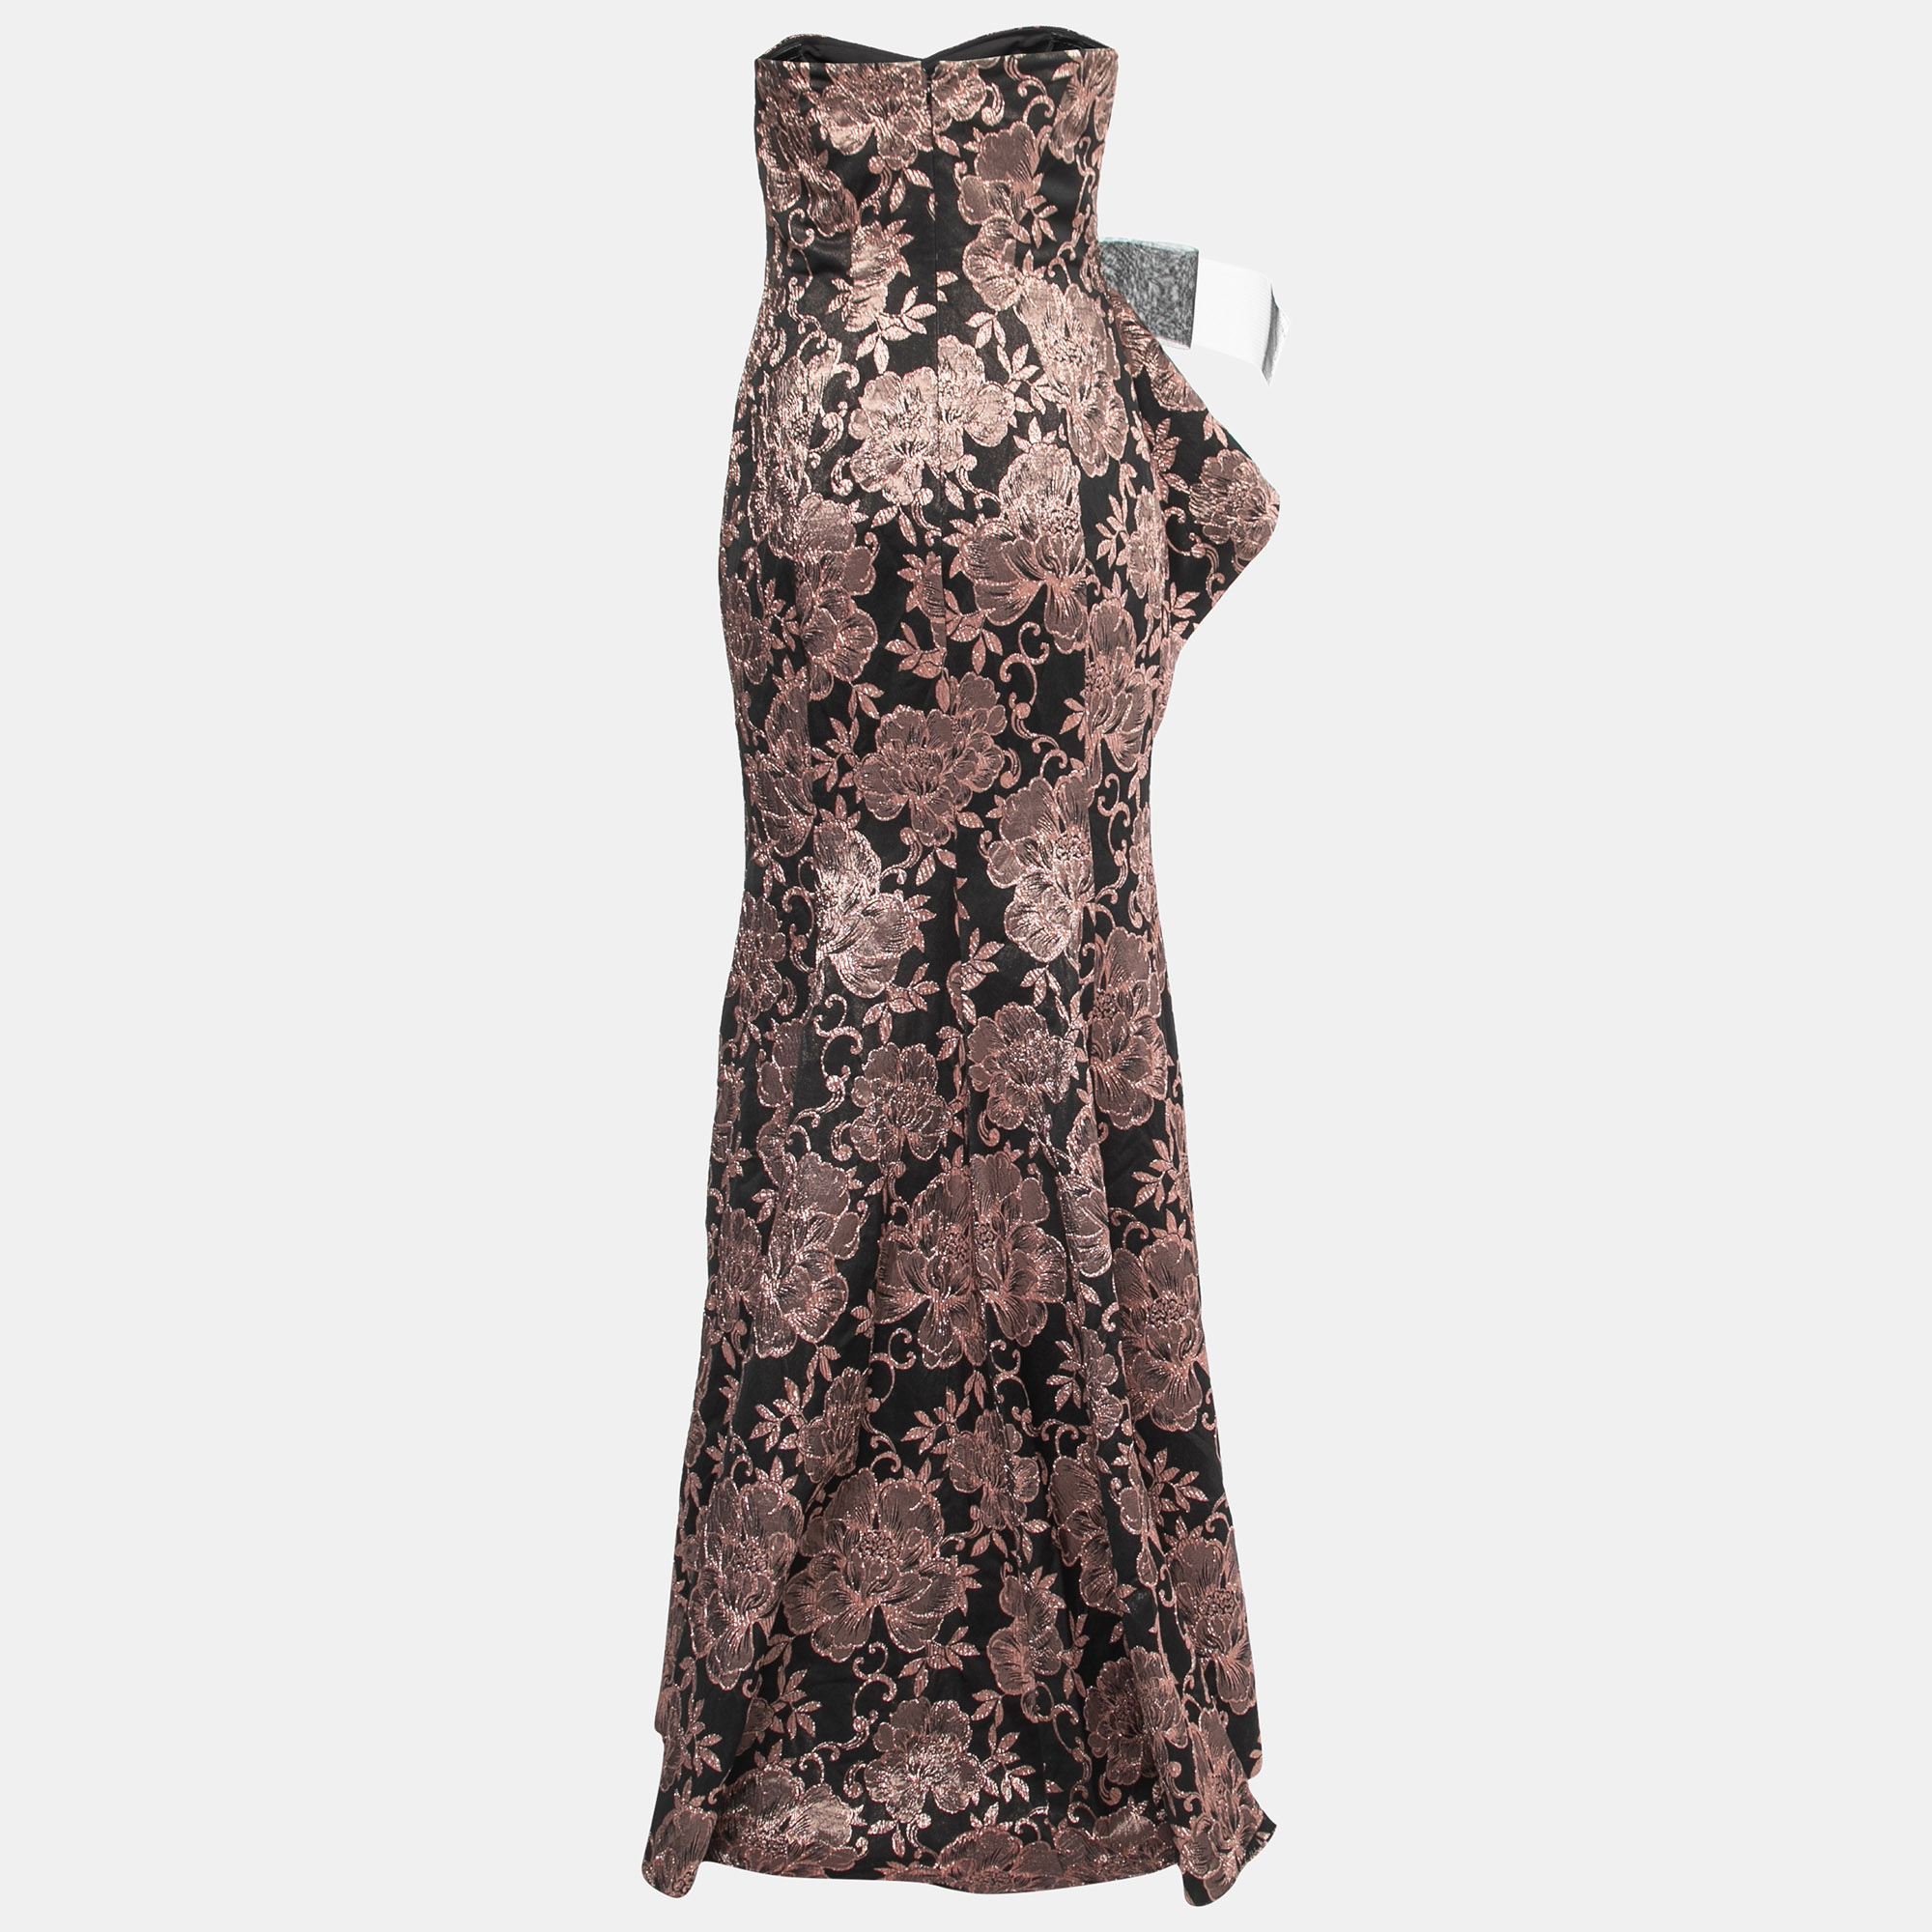 

Badgley Mischka Couture Black/Metallic Floral Jacquard Strapless Gown